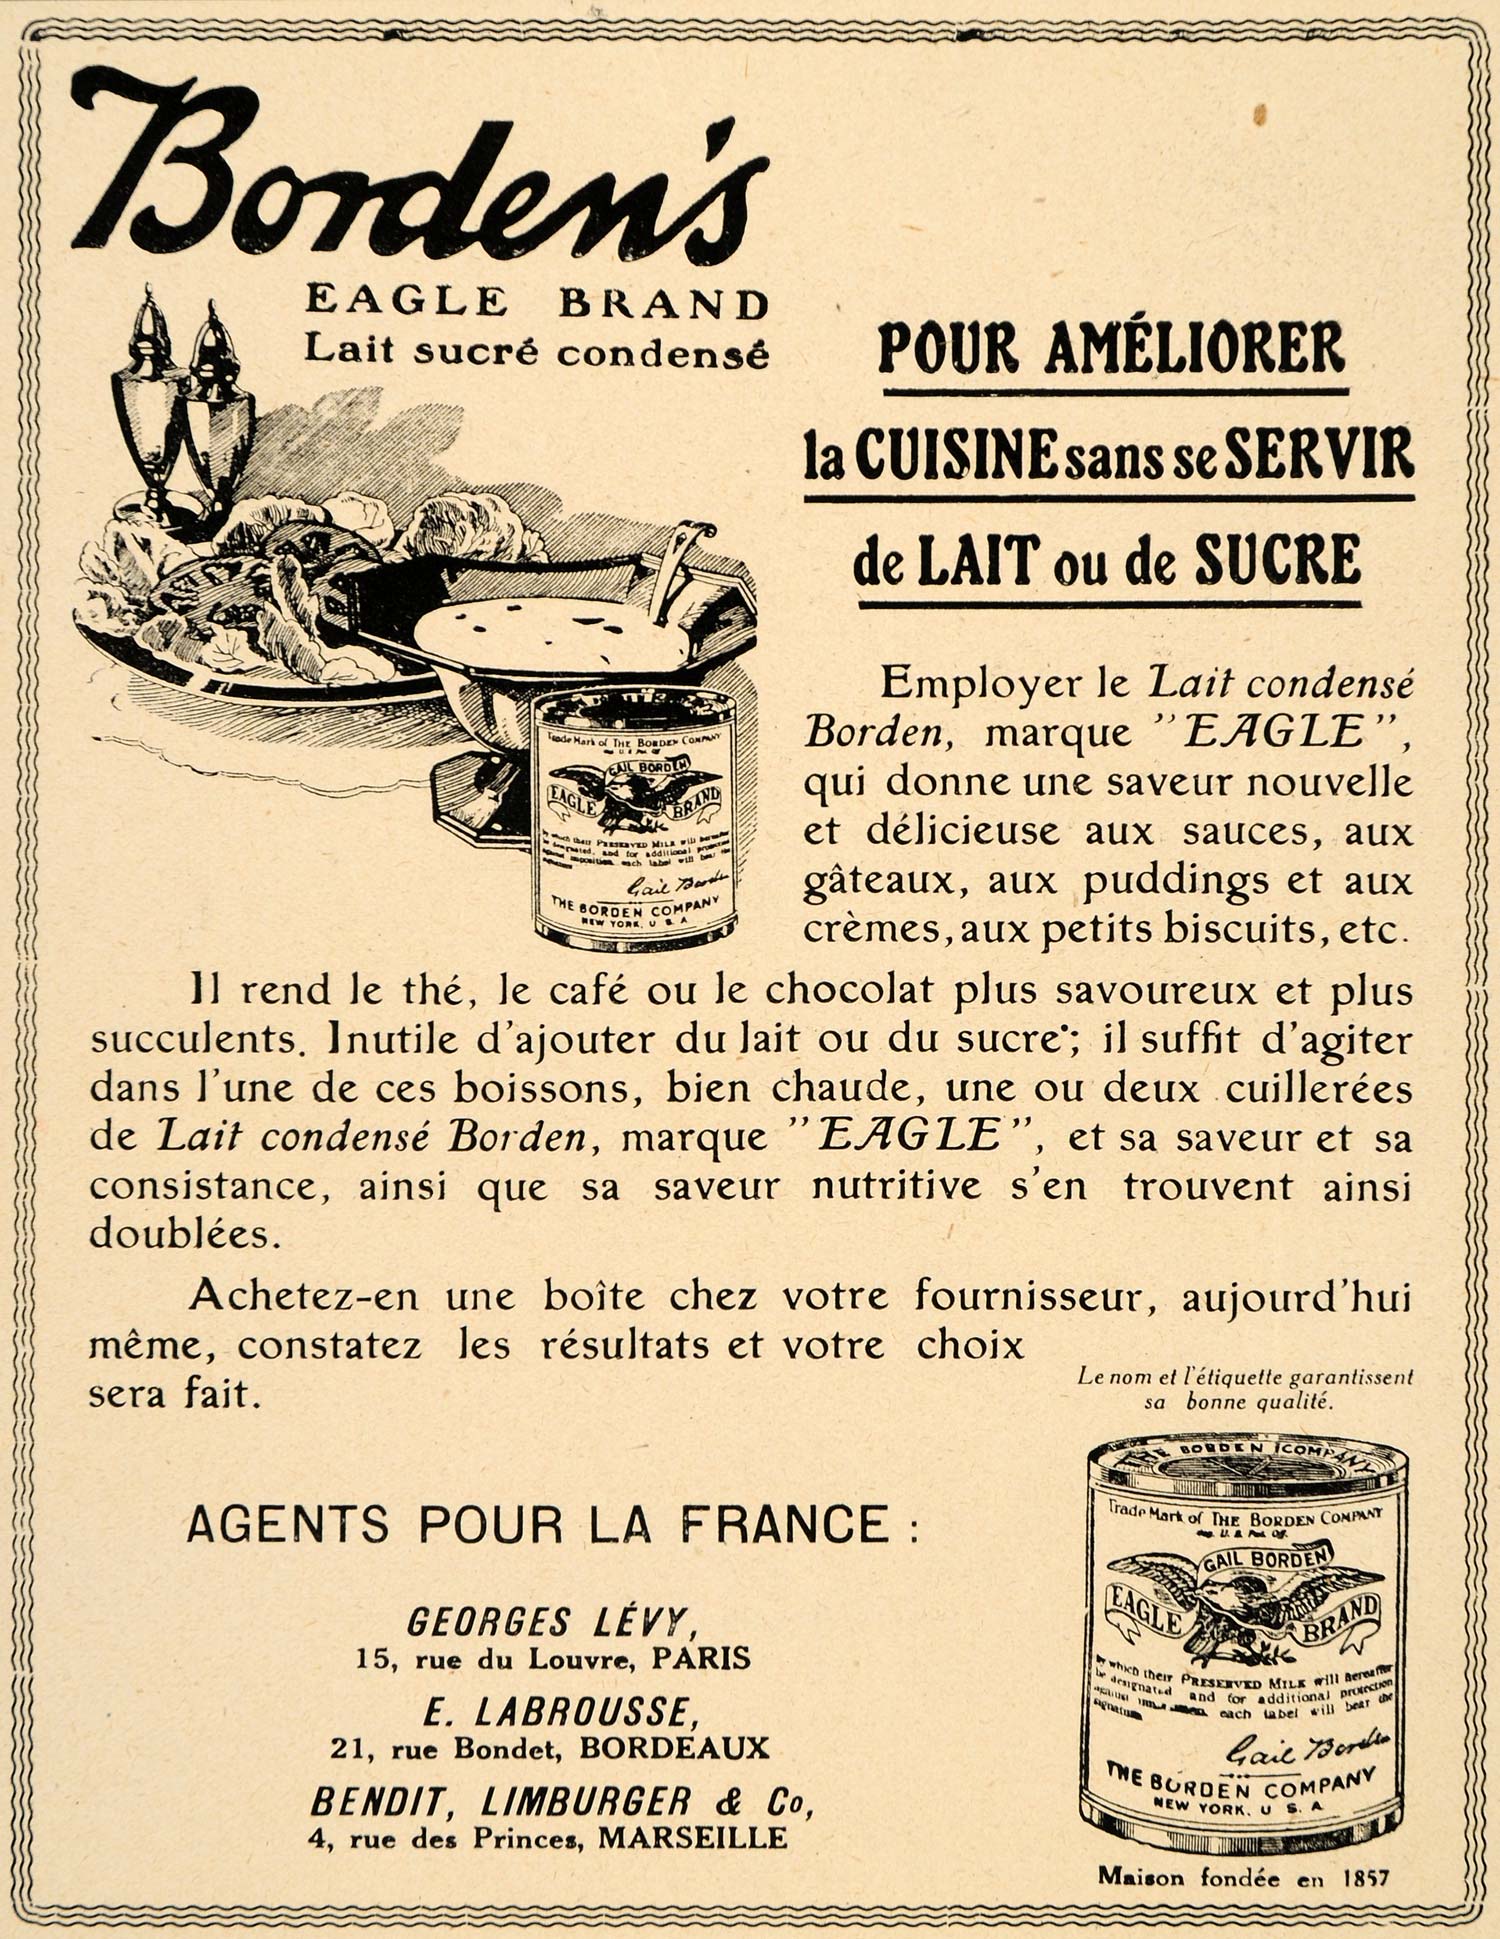 1920 Ad French Bordens Eagle Condensed Milk Lait Canned - ORIGINAL ILL3